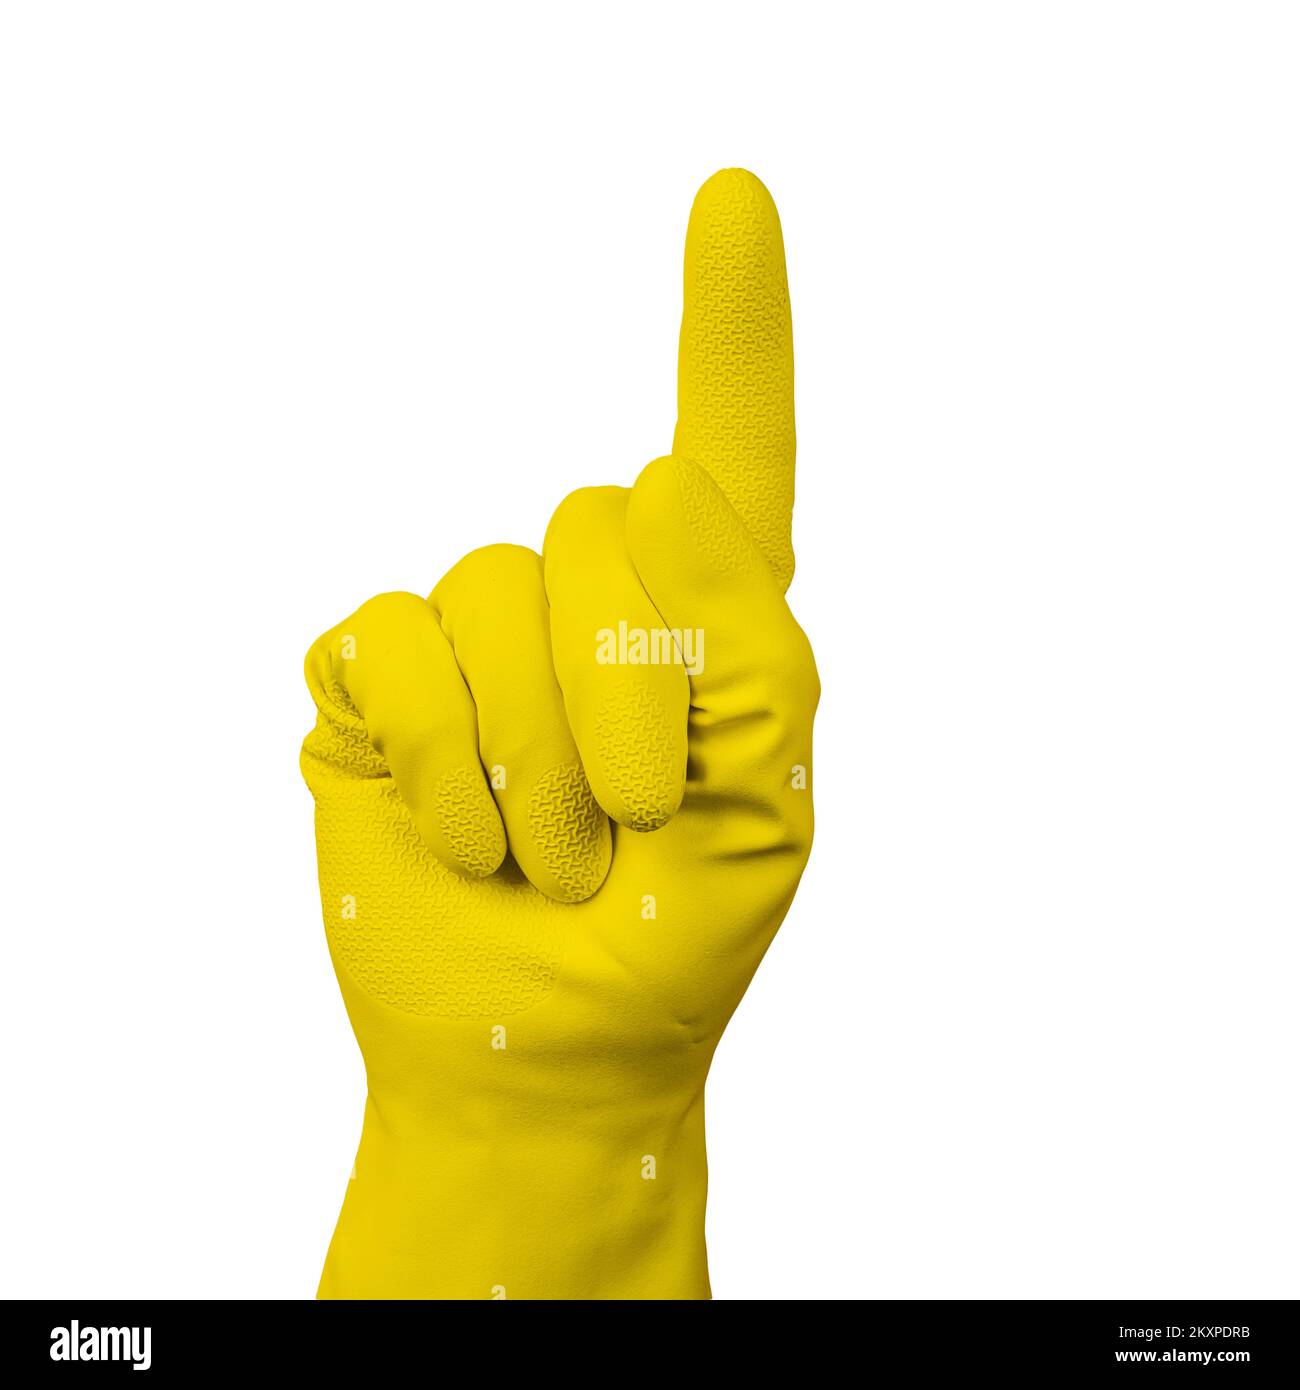 the index finger raised by a hand wearing a yellow rubber glove Stock Photo